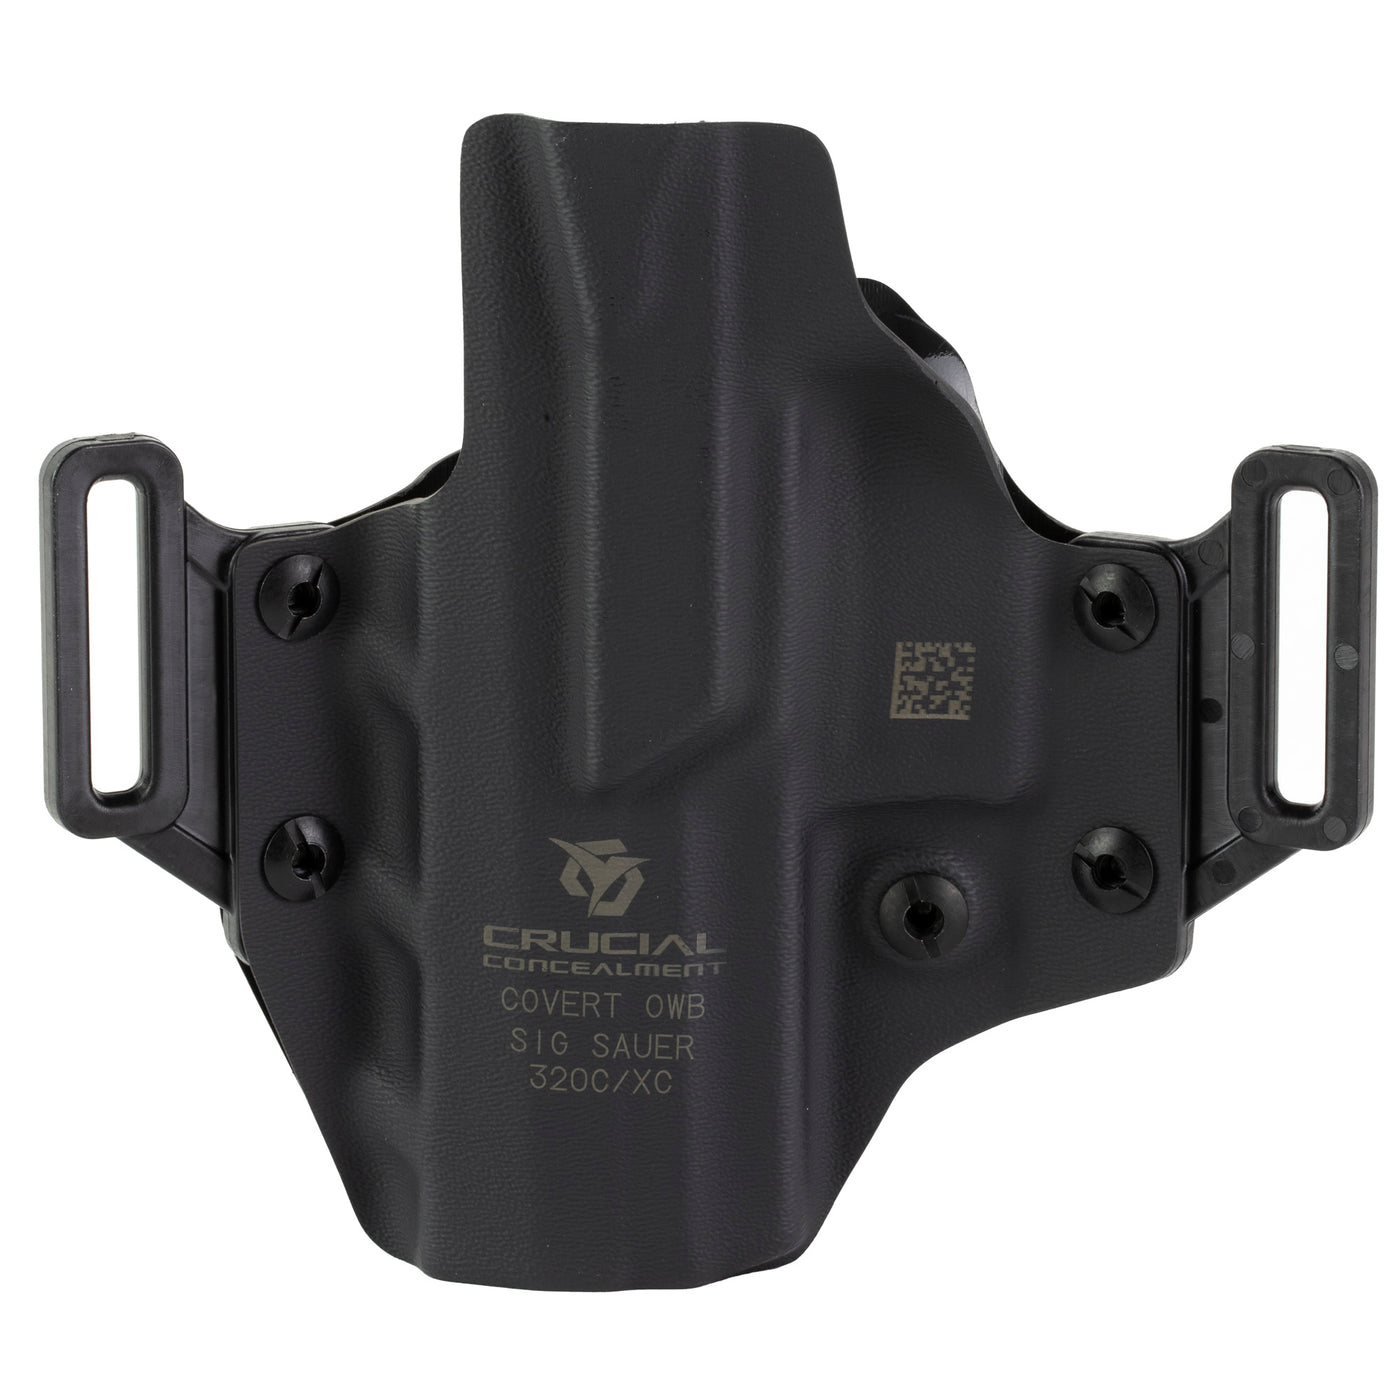 Crucial Owb For Sig Sauer P320 C/xc